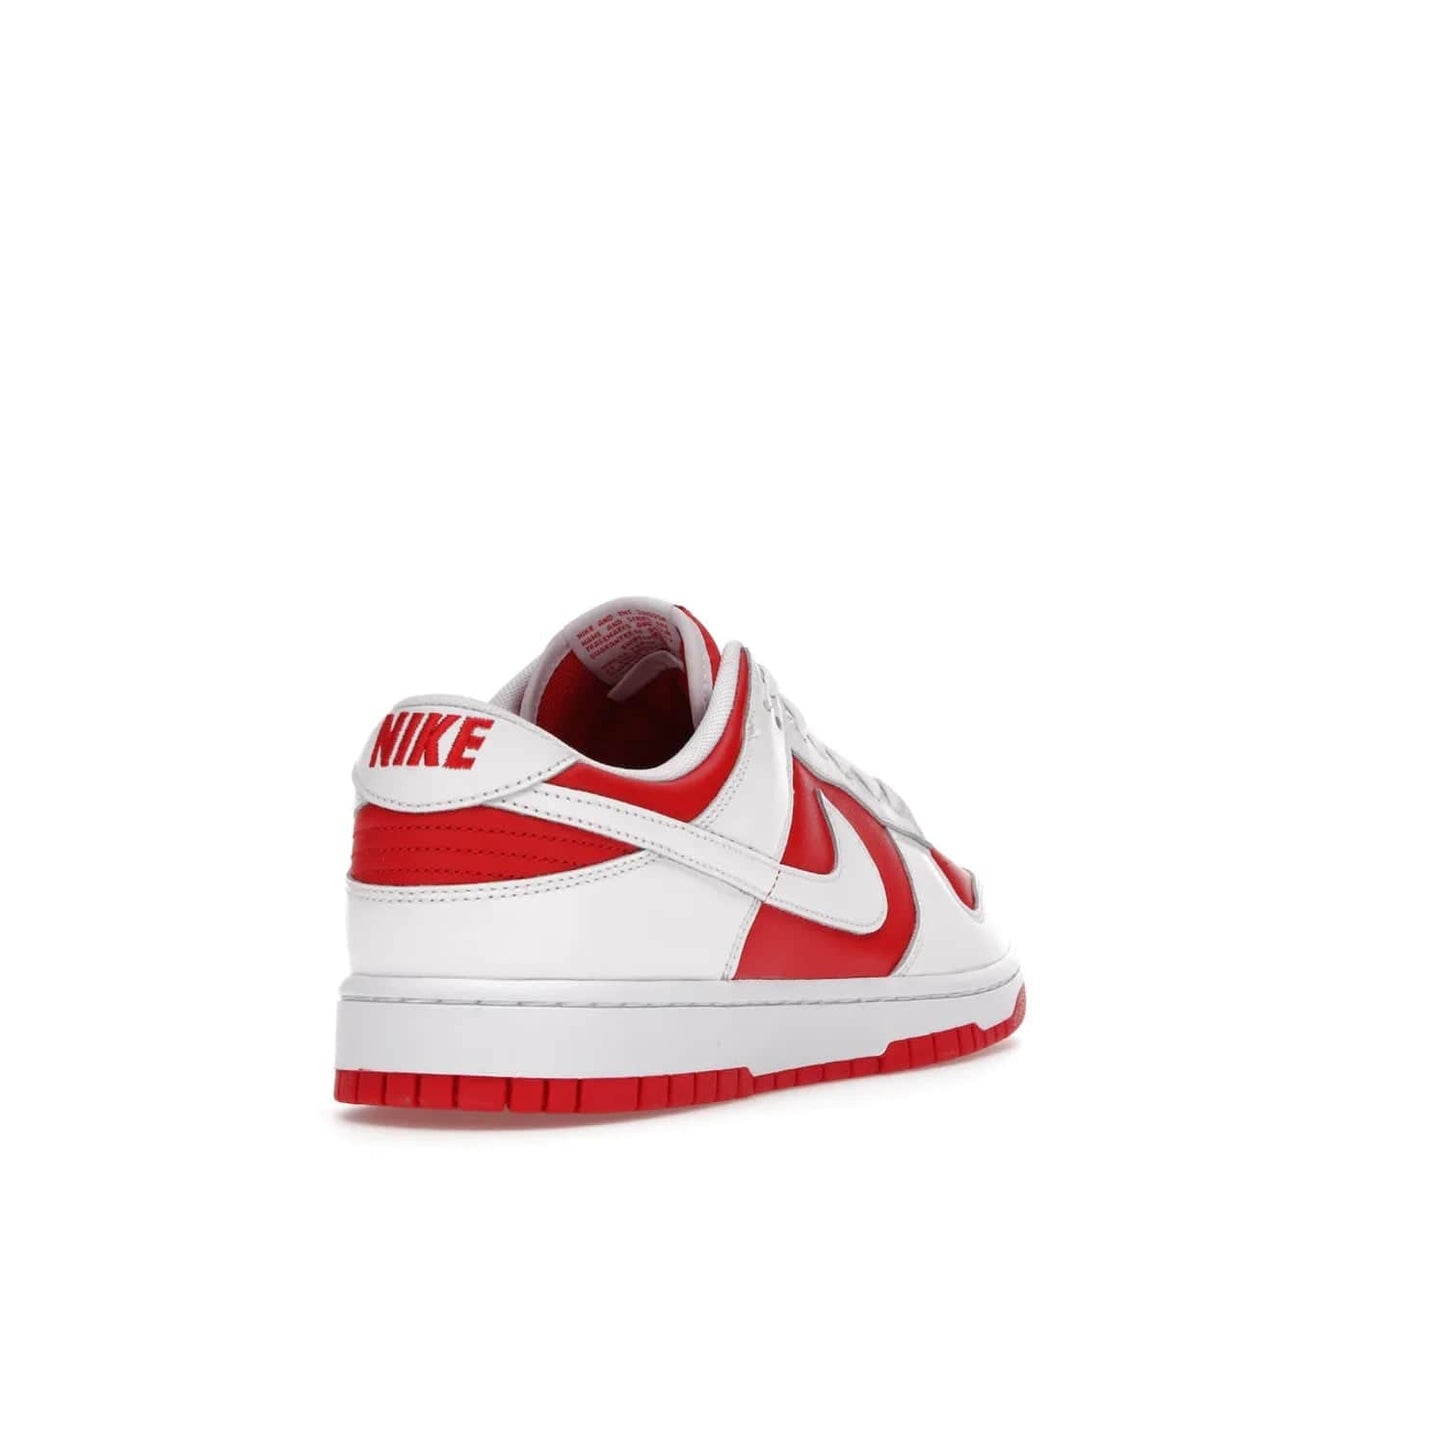 Nike Dunk Low Championship Red (2021) - Image 31 - Only at www.BallersClubKickz.com - A bold and stylish Nike Dunk Low Championship Red from 2021 with a classic retro design. University Red upper, white leather overlays and Swooshes, and a woven tongue label. Make a statement with these sleek kicks!